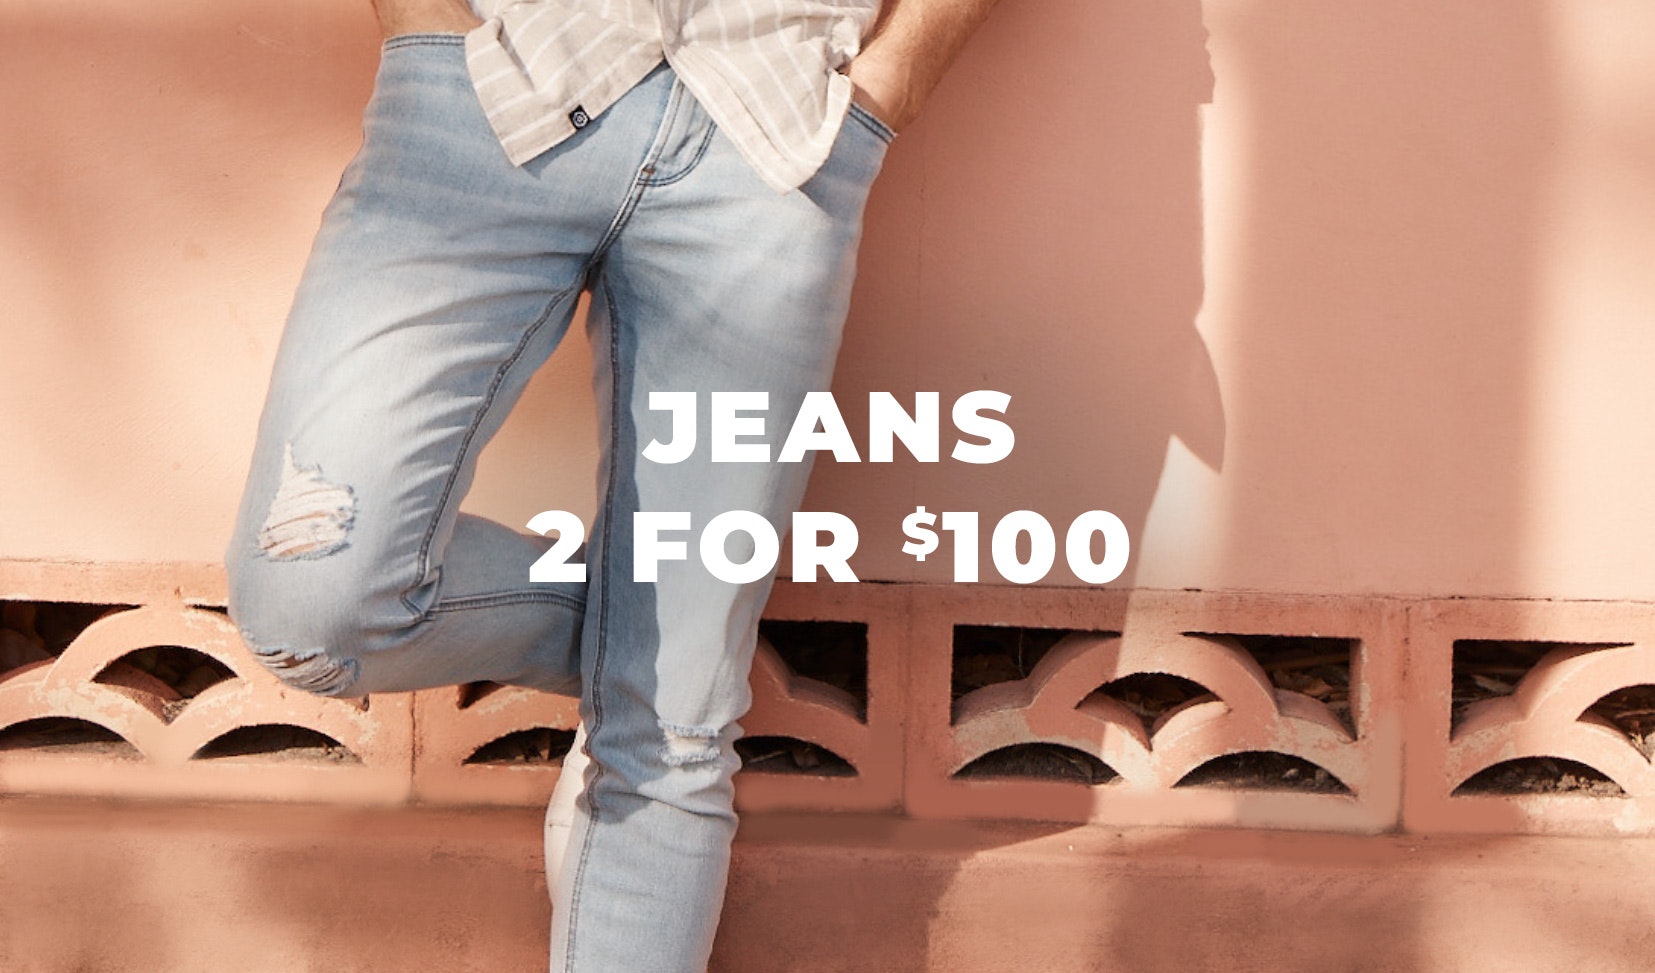 2 for 100 jeans